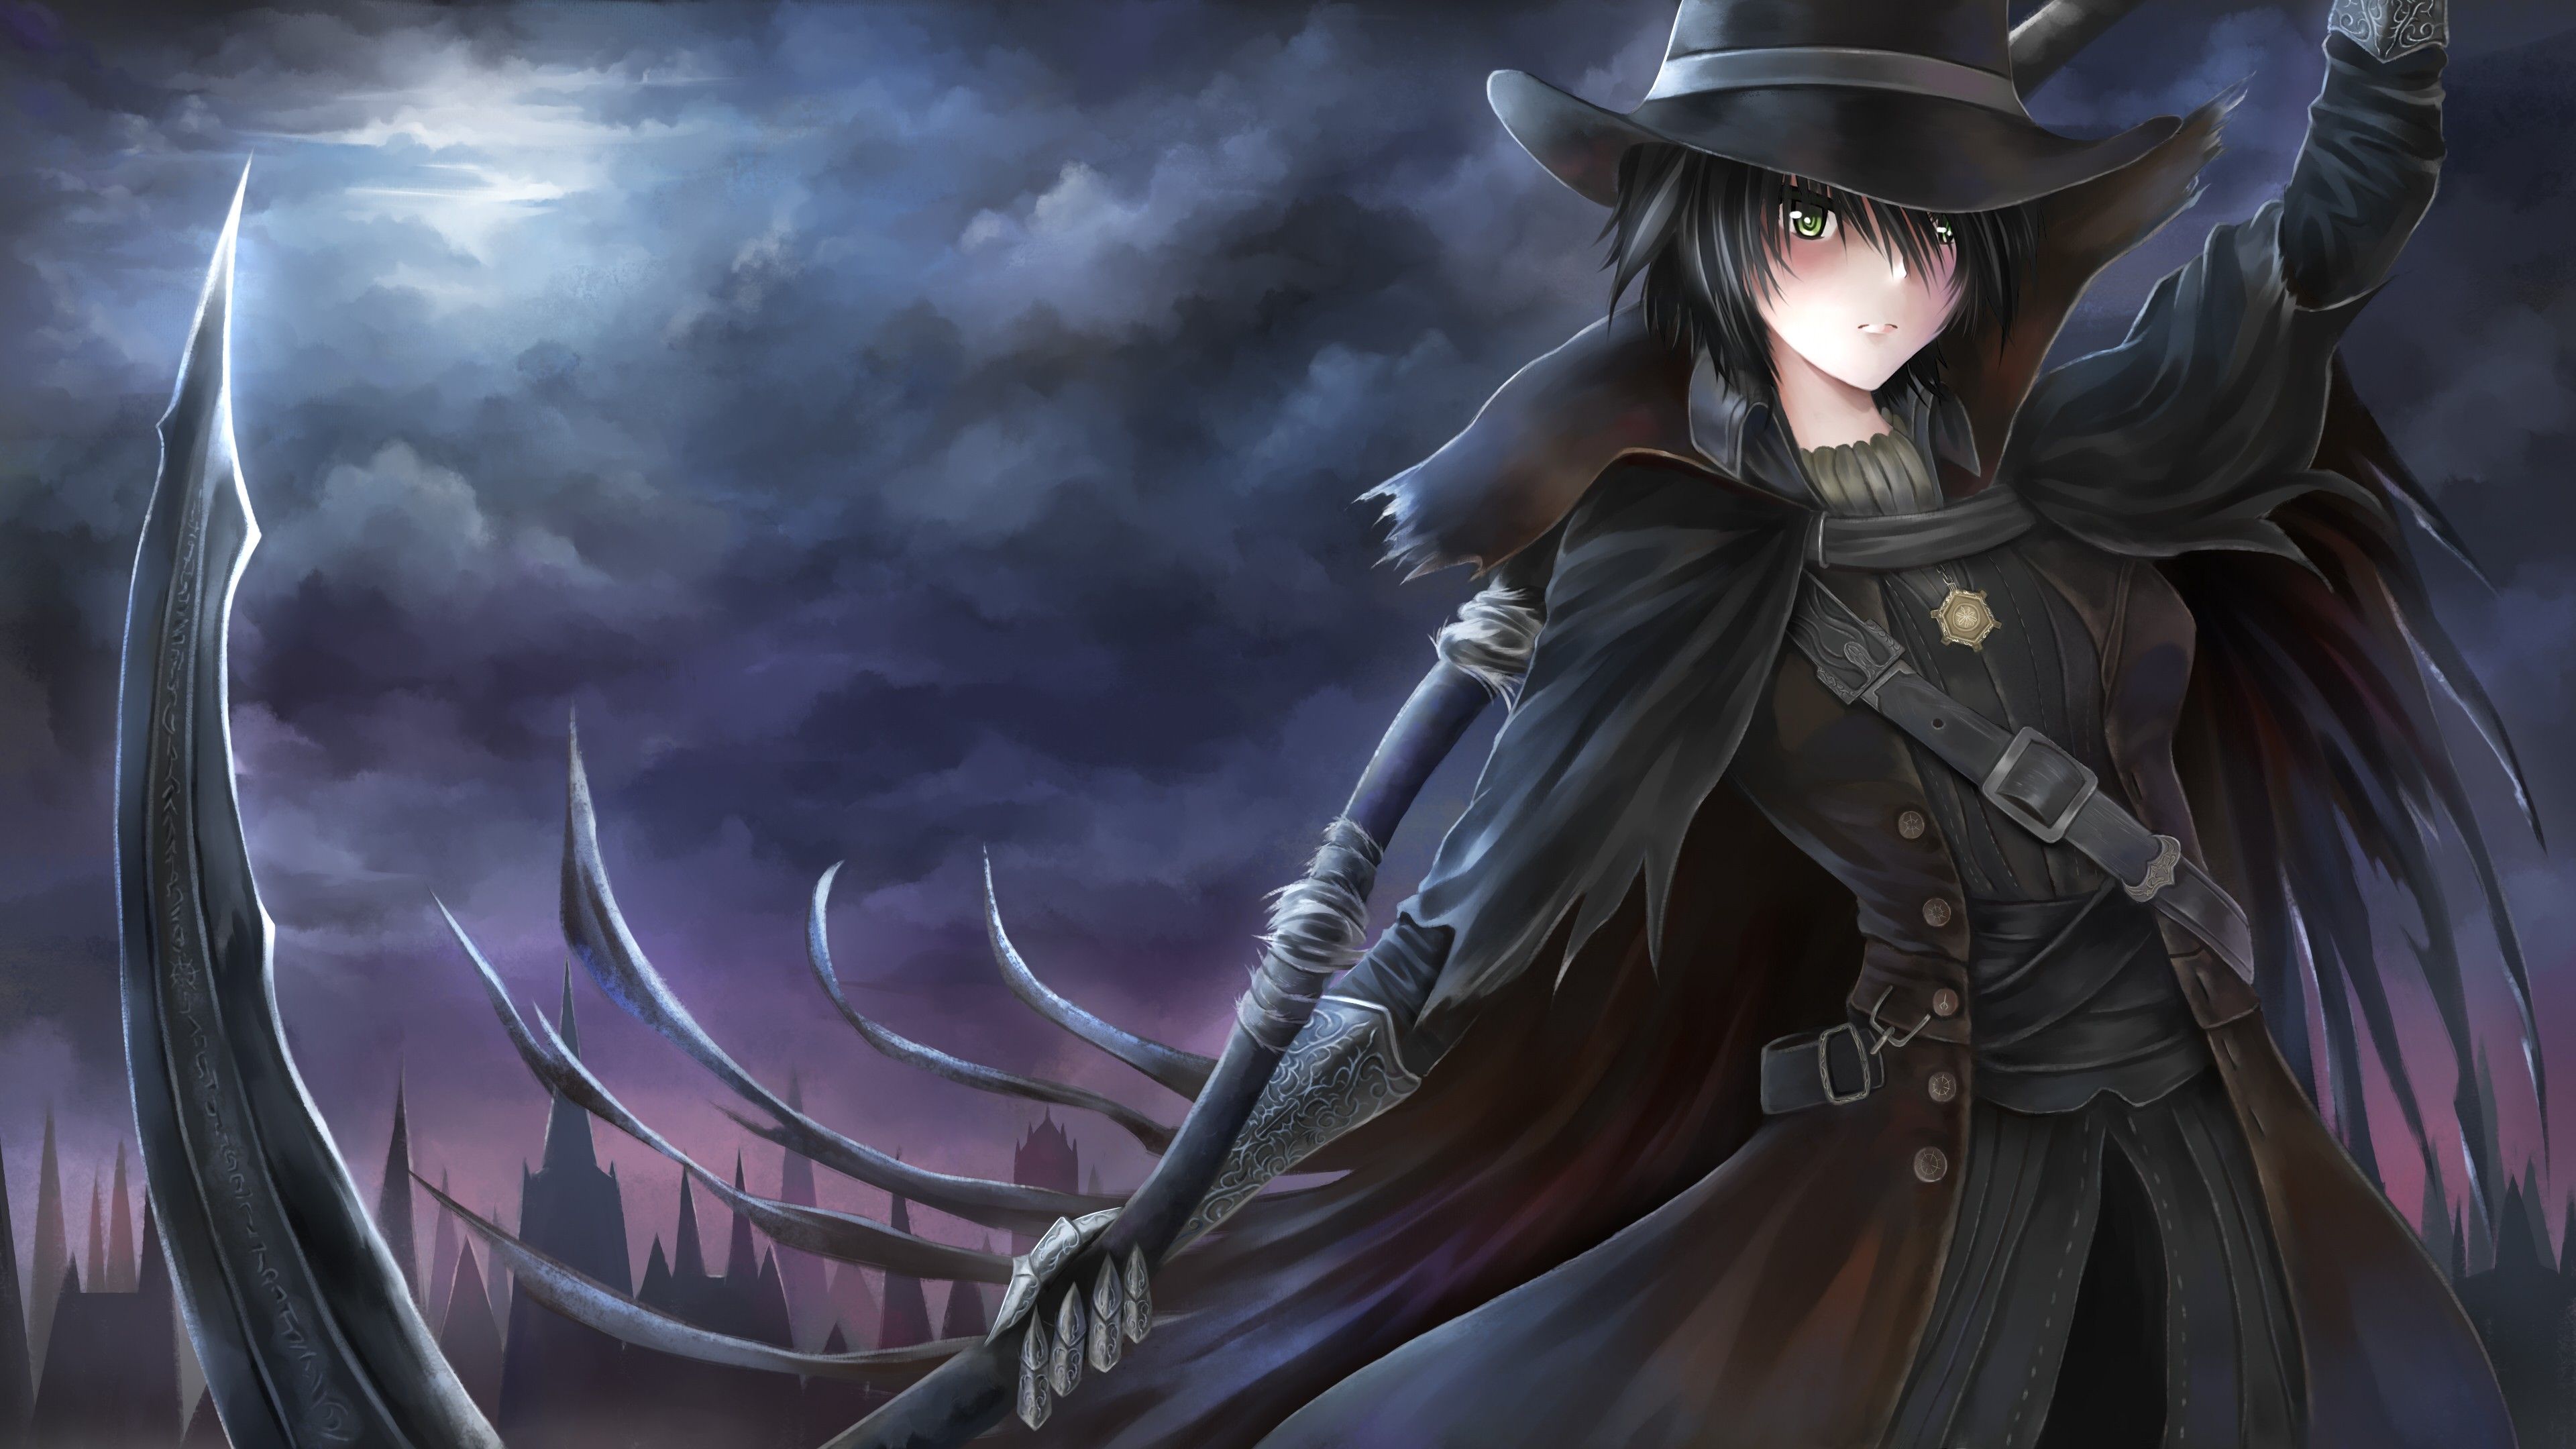 Man in black anime character Bloodborne wallpaper and image